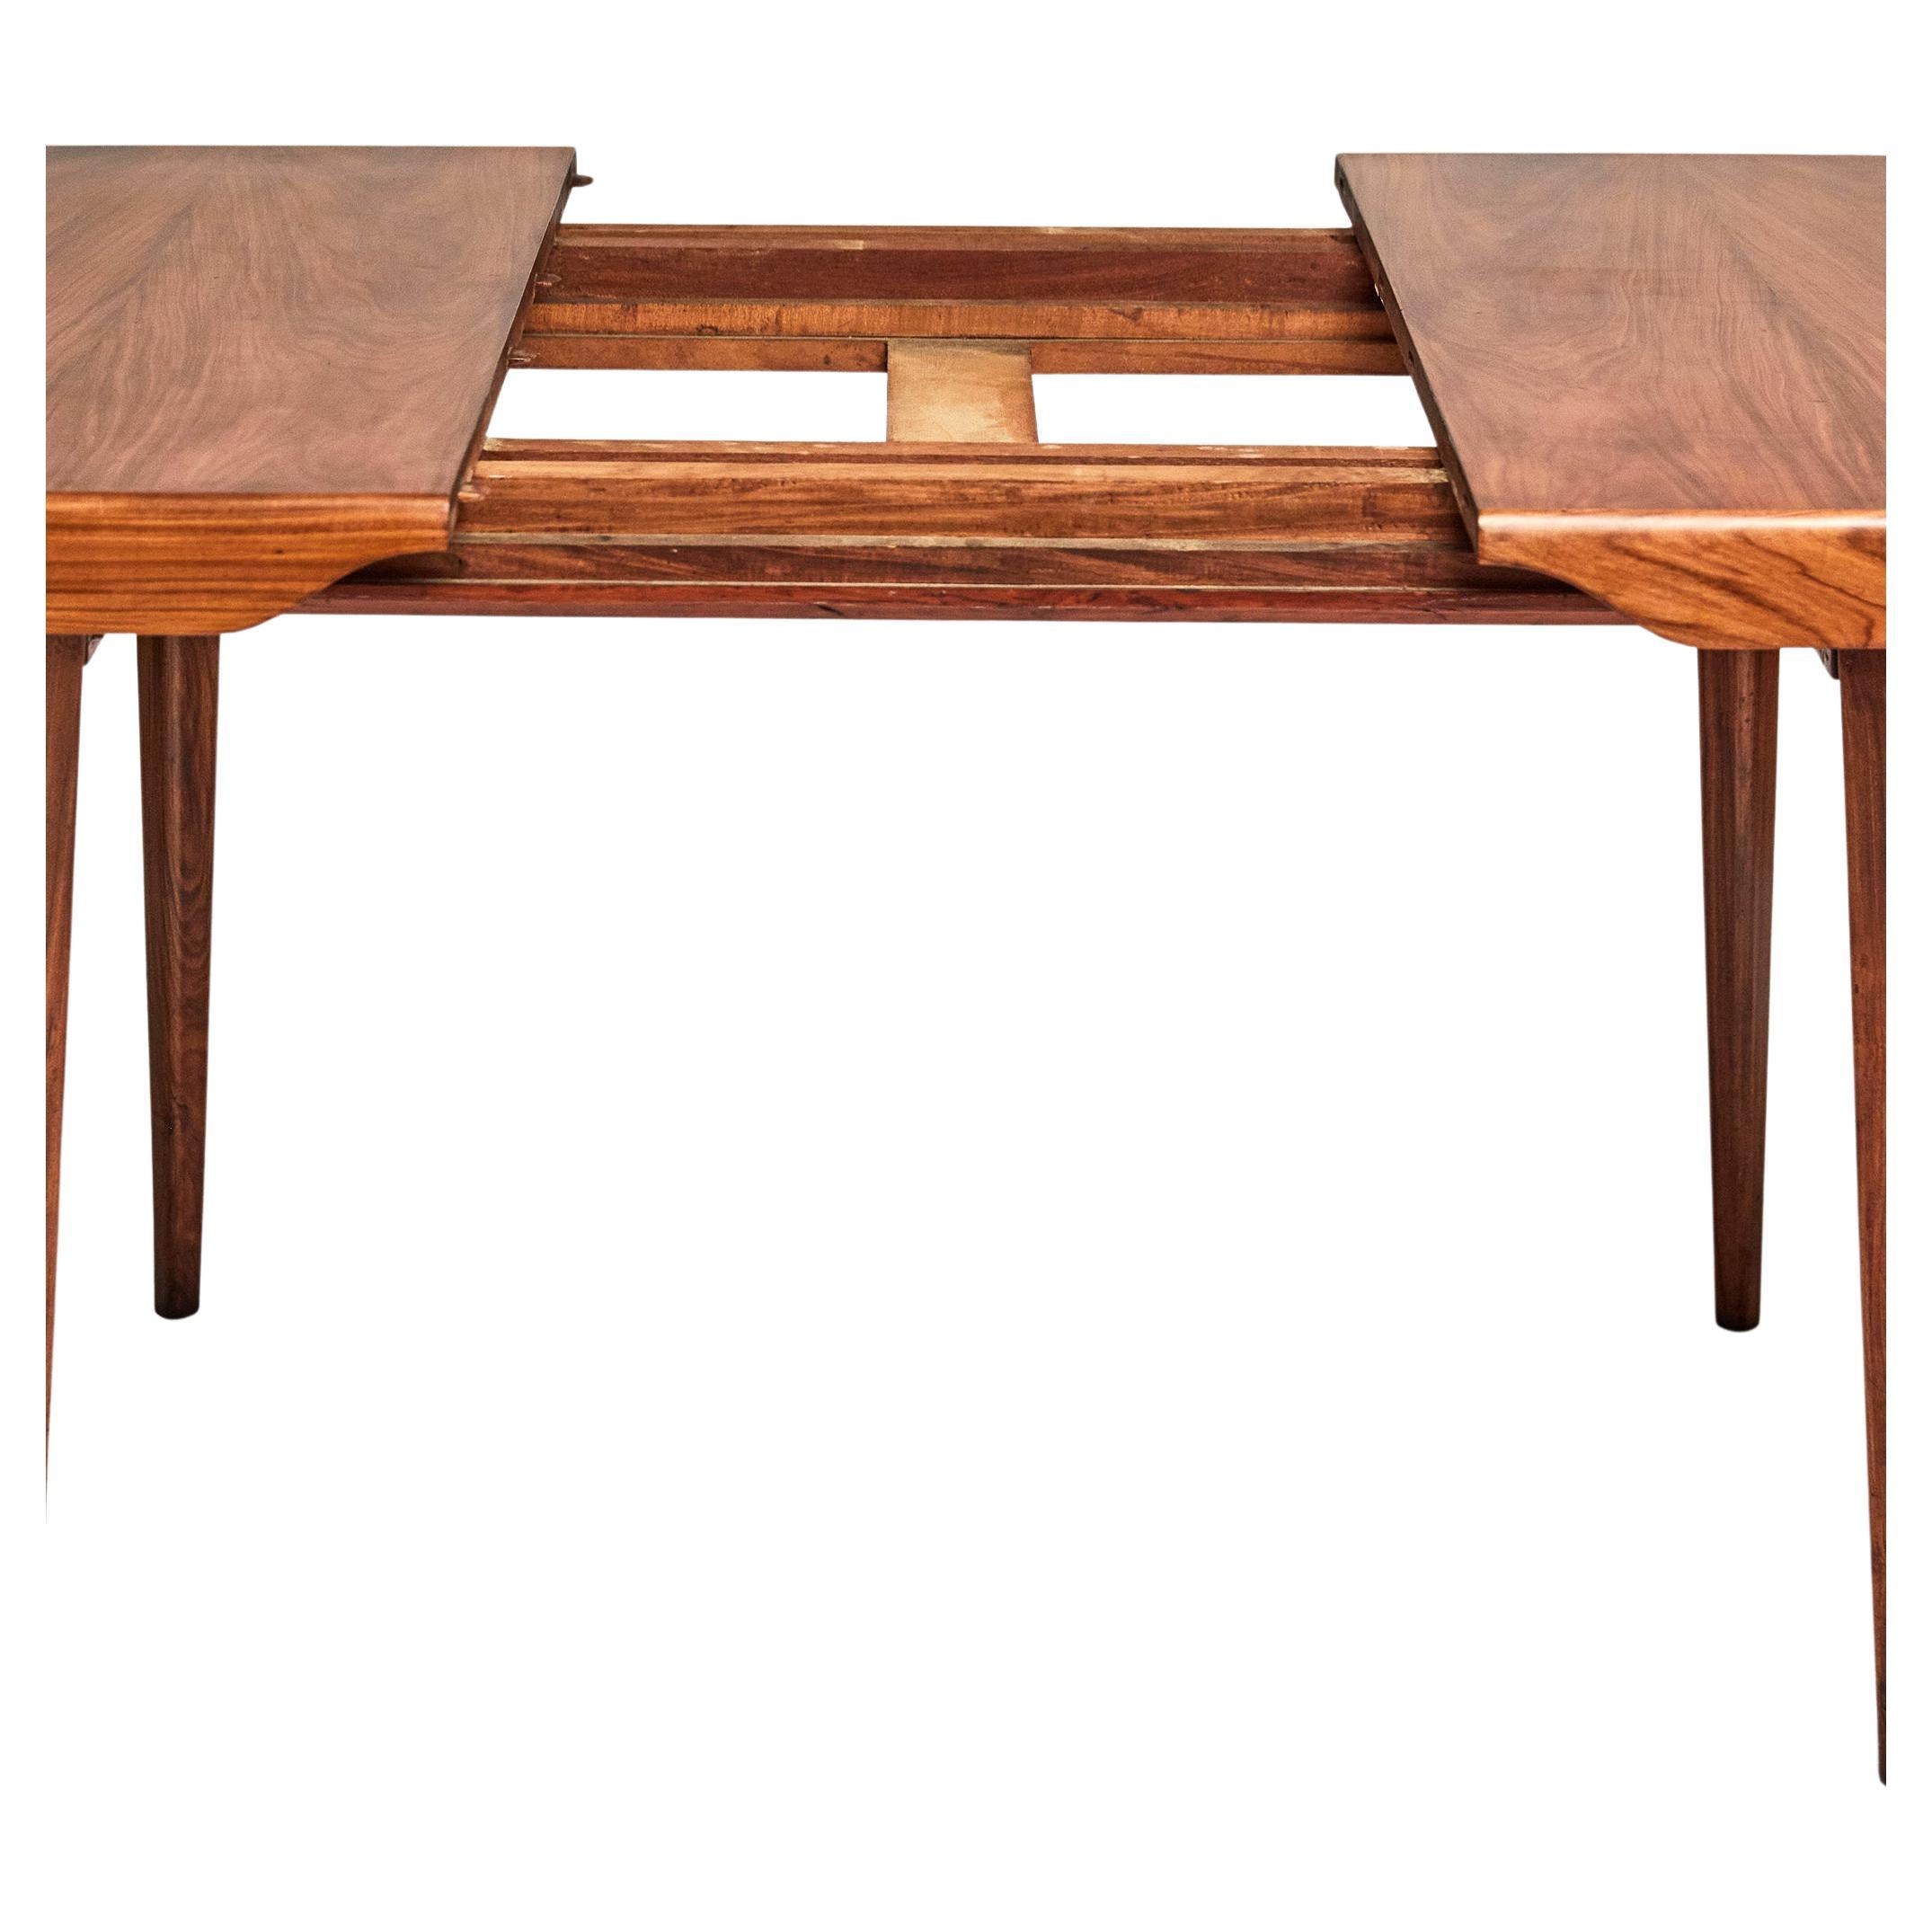 Hand-Painted Mid-Century Modern Dining Table in Caviuna Hardwood by Carlo Hauner 1950s Brazil For Sale